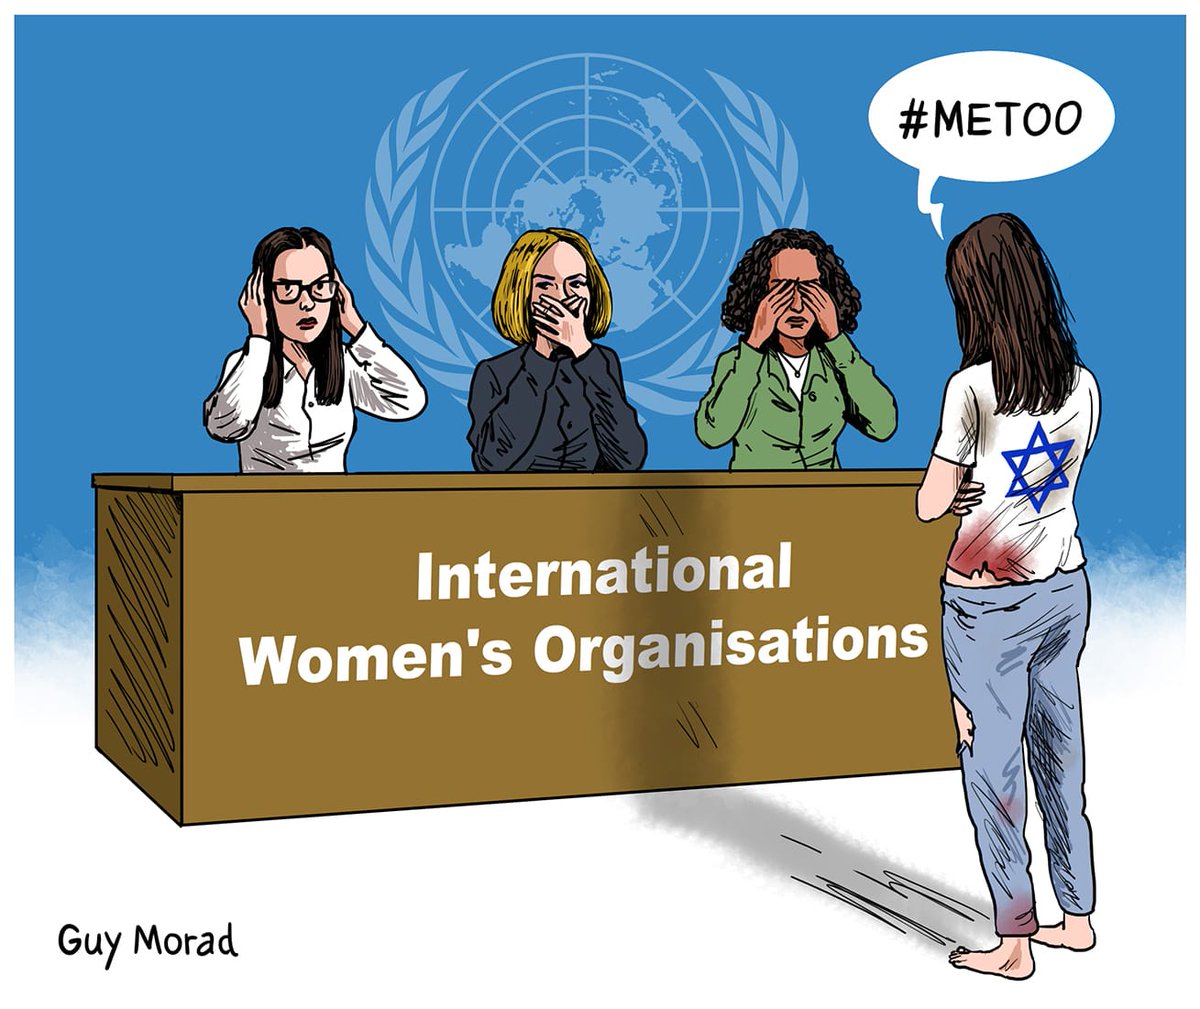 #MeToo unless you're a Jew